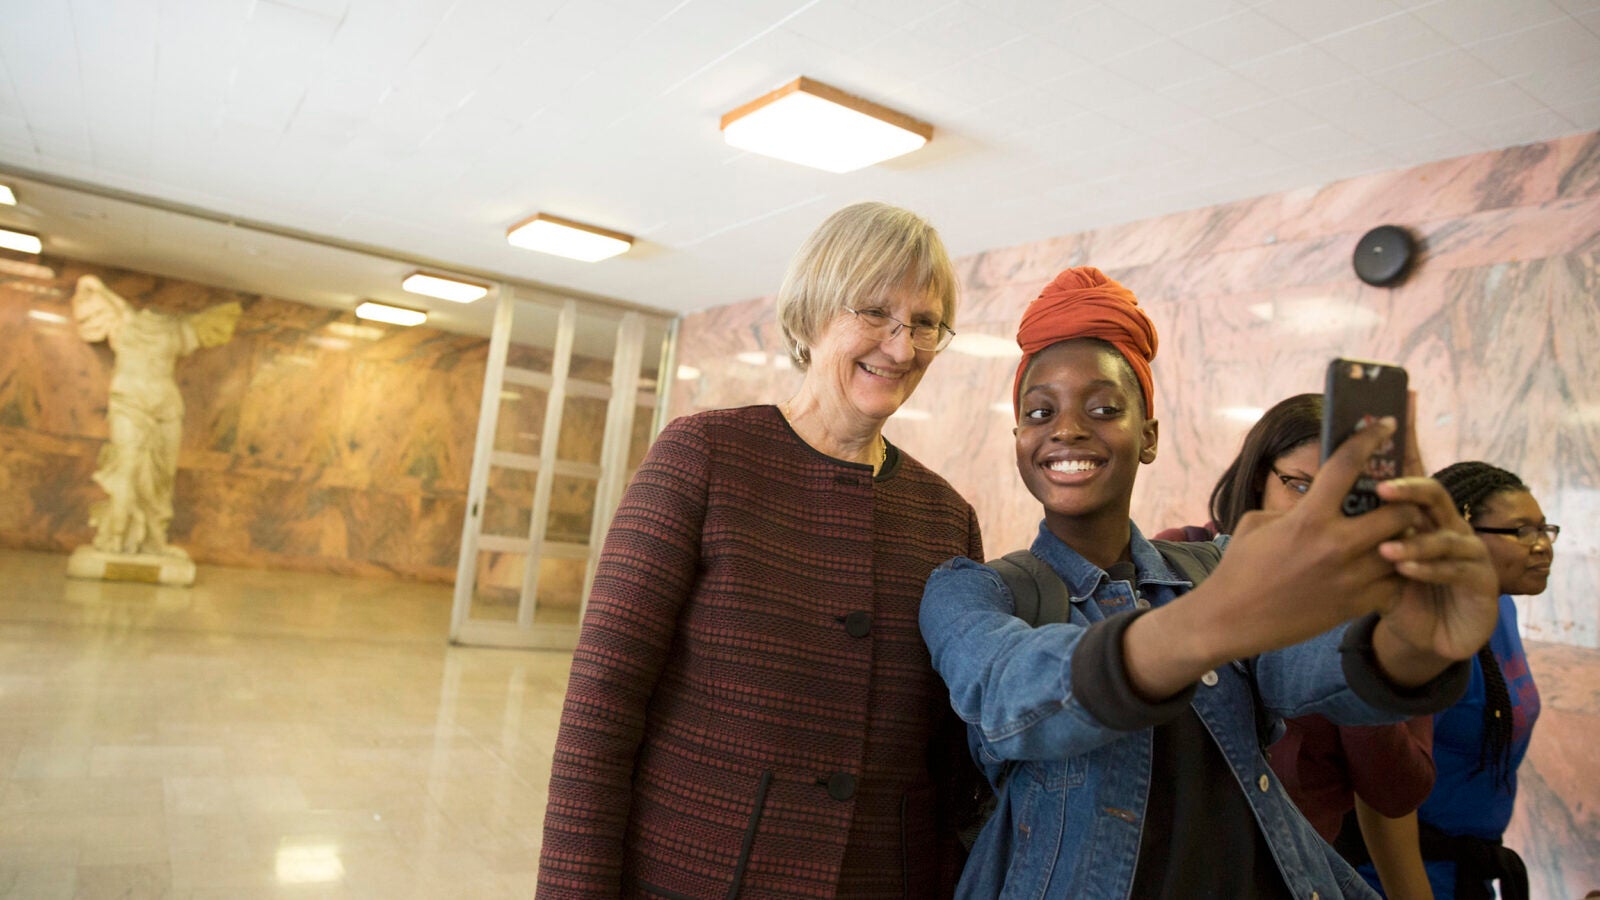  “It feels good to know that somebody of her stature wants to come to speak to us,” said Amanda Smith, pictured taking a selfie with Harvard President Drew Faust.